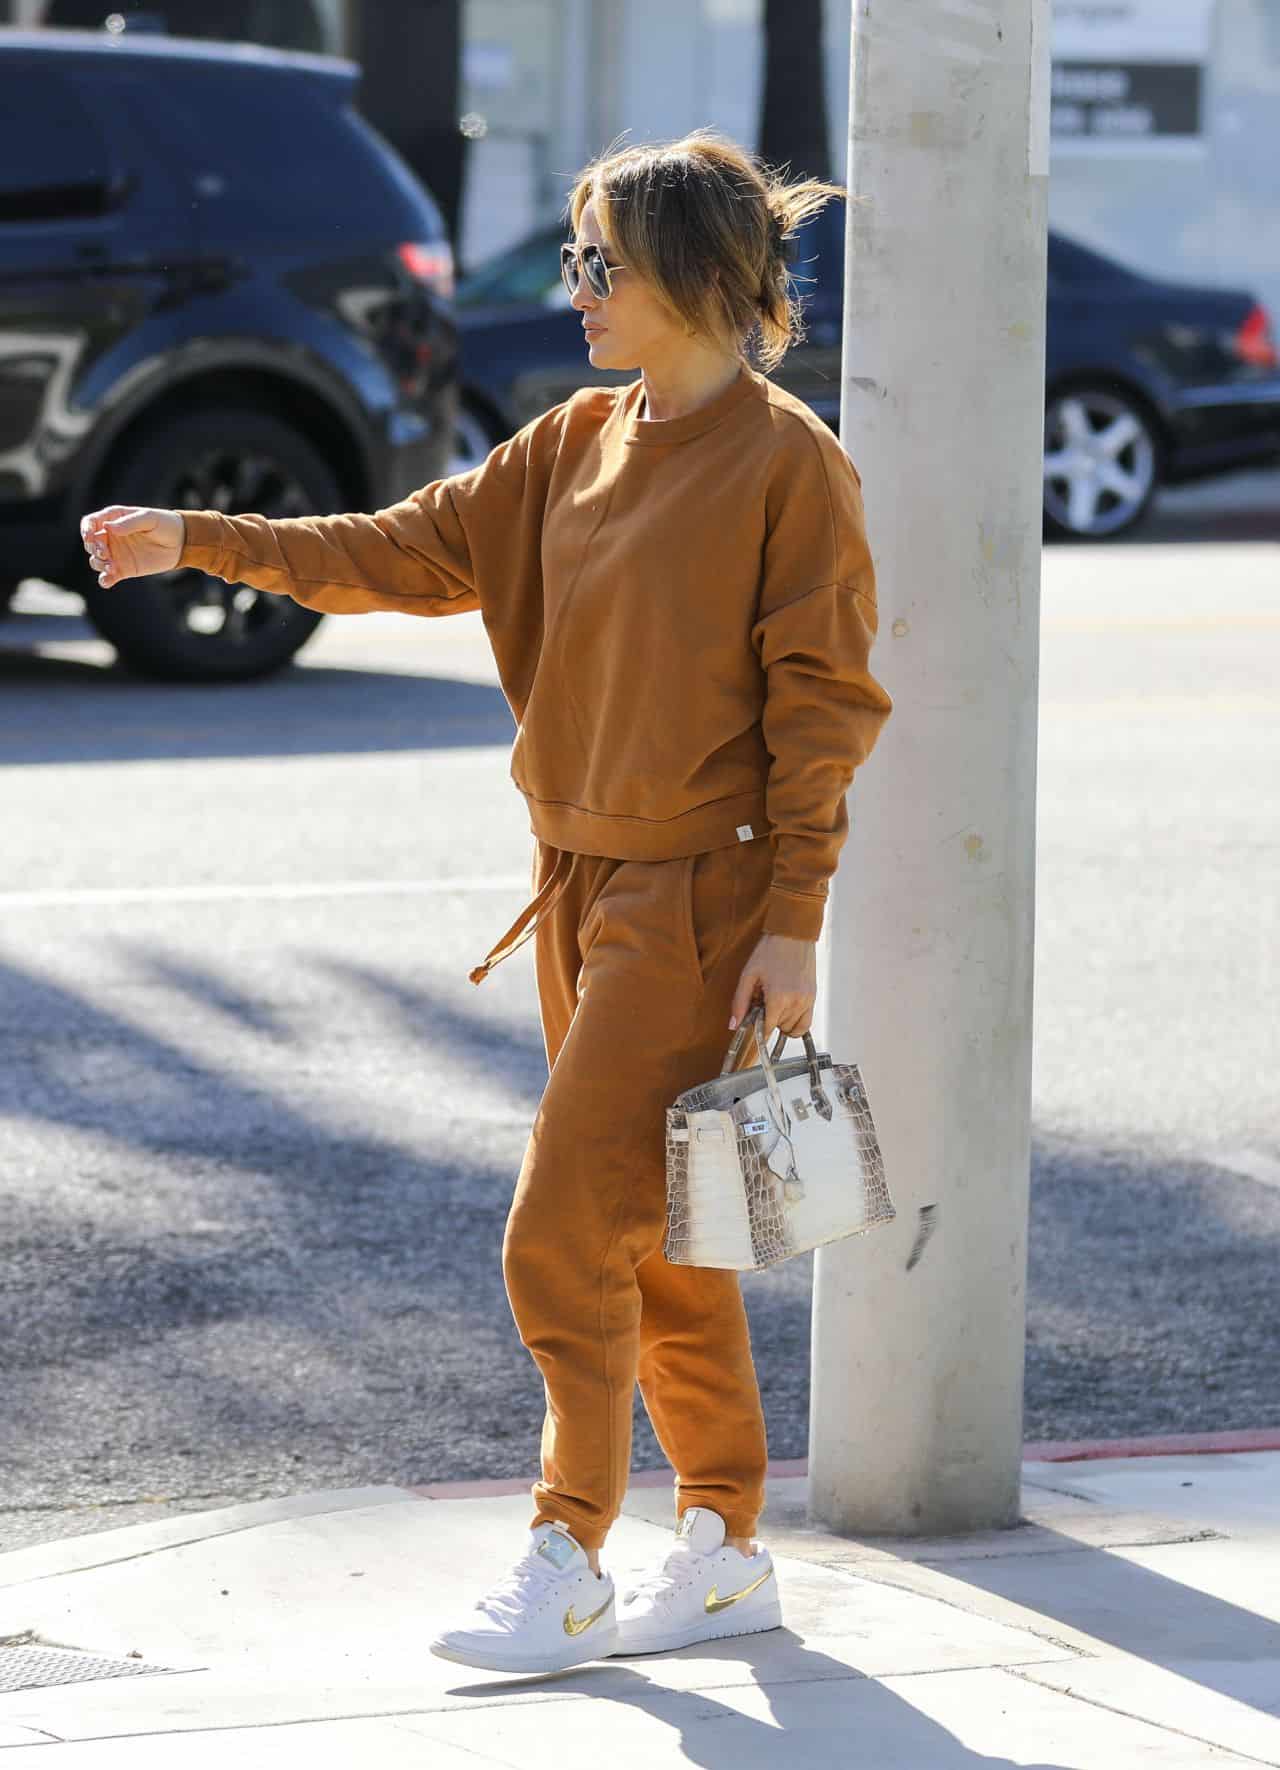 Jennifer Lopez in Comfy Outfit in Shopping for Furniture and Rugs with Daughter Emme